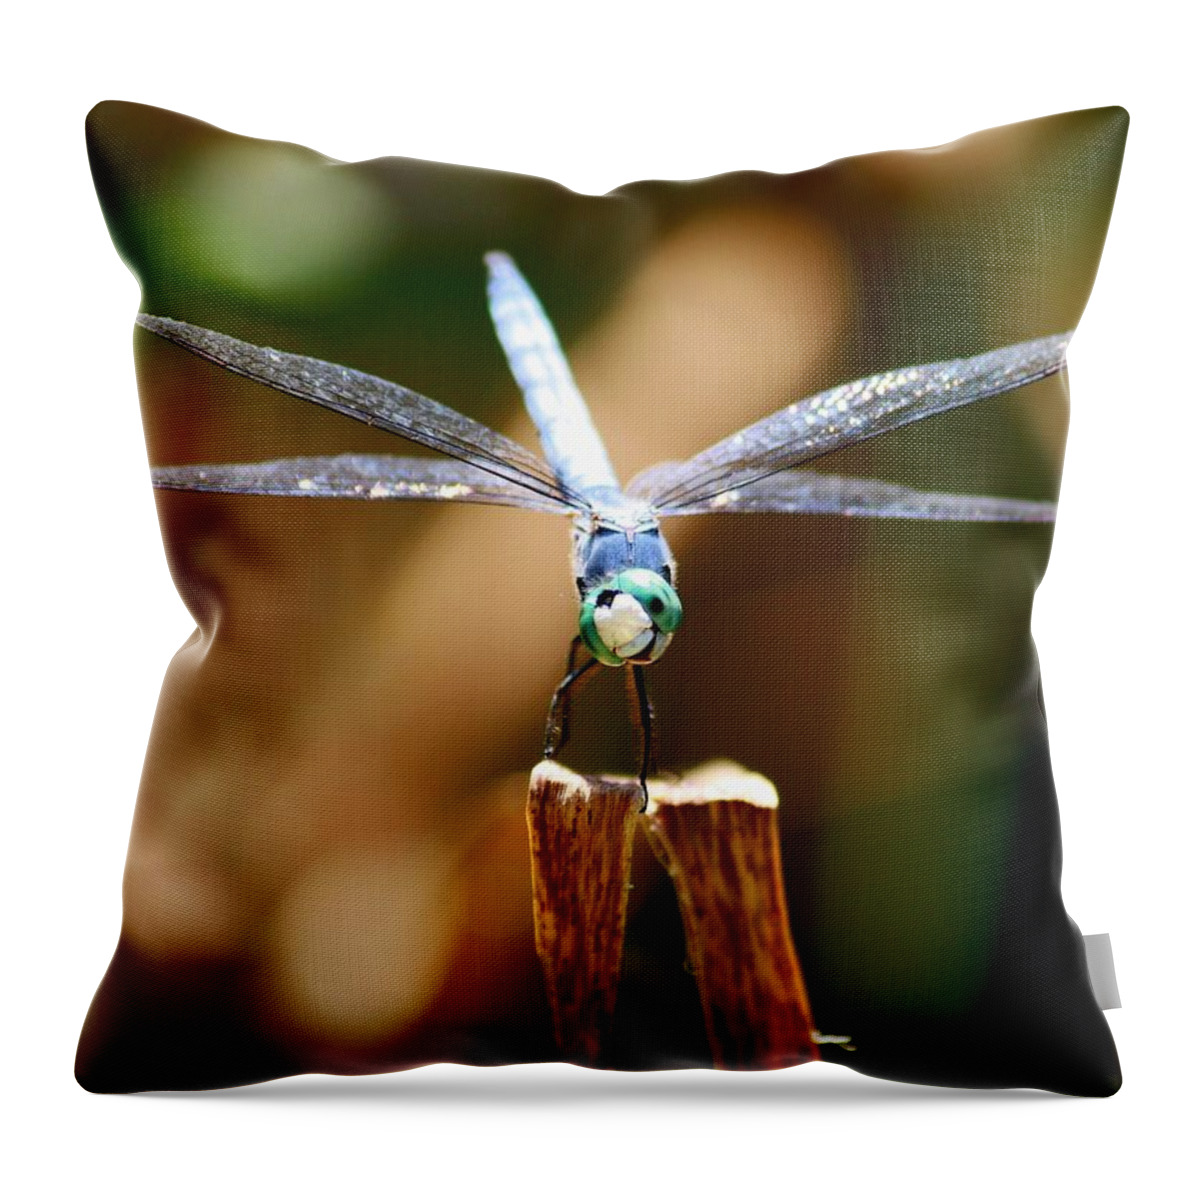 Dragonfly Throw Pillow featuring the photograph Made Ya Smile by Patrick Witz